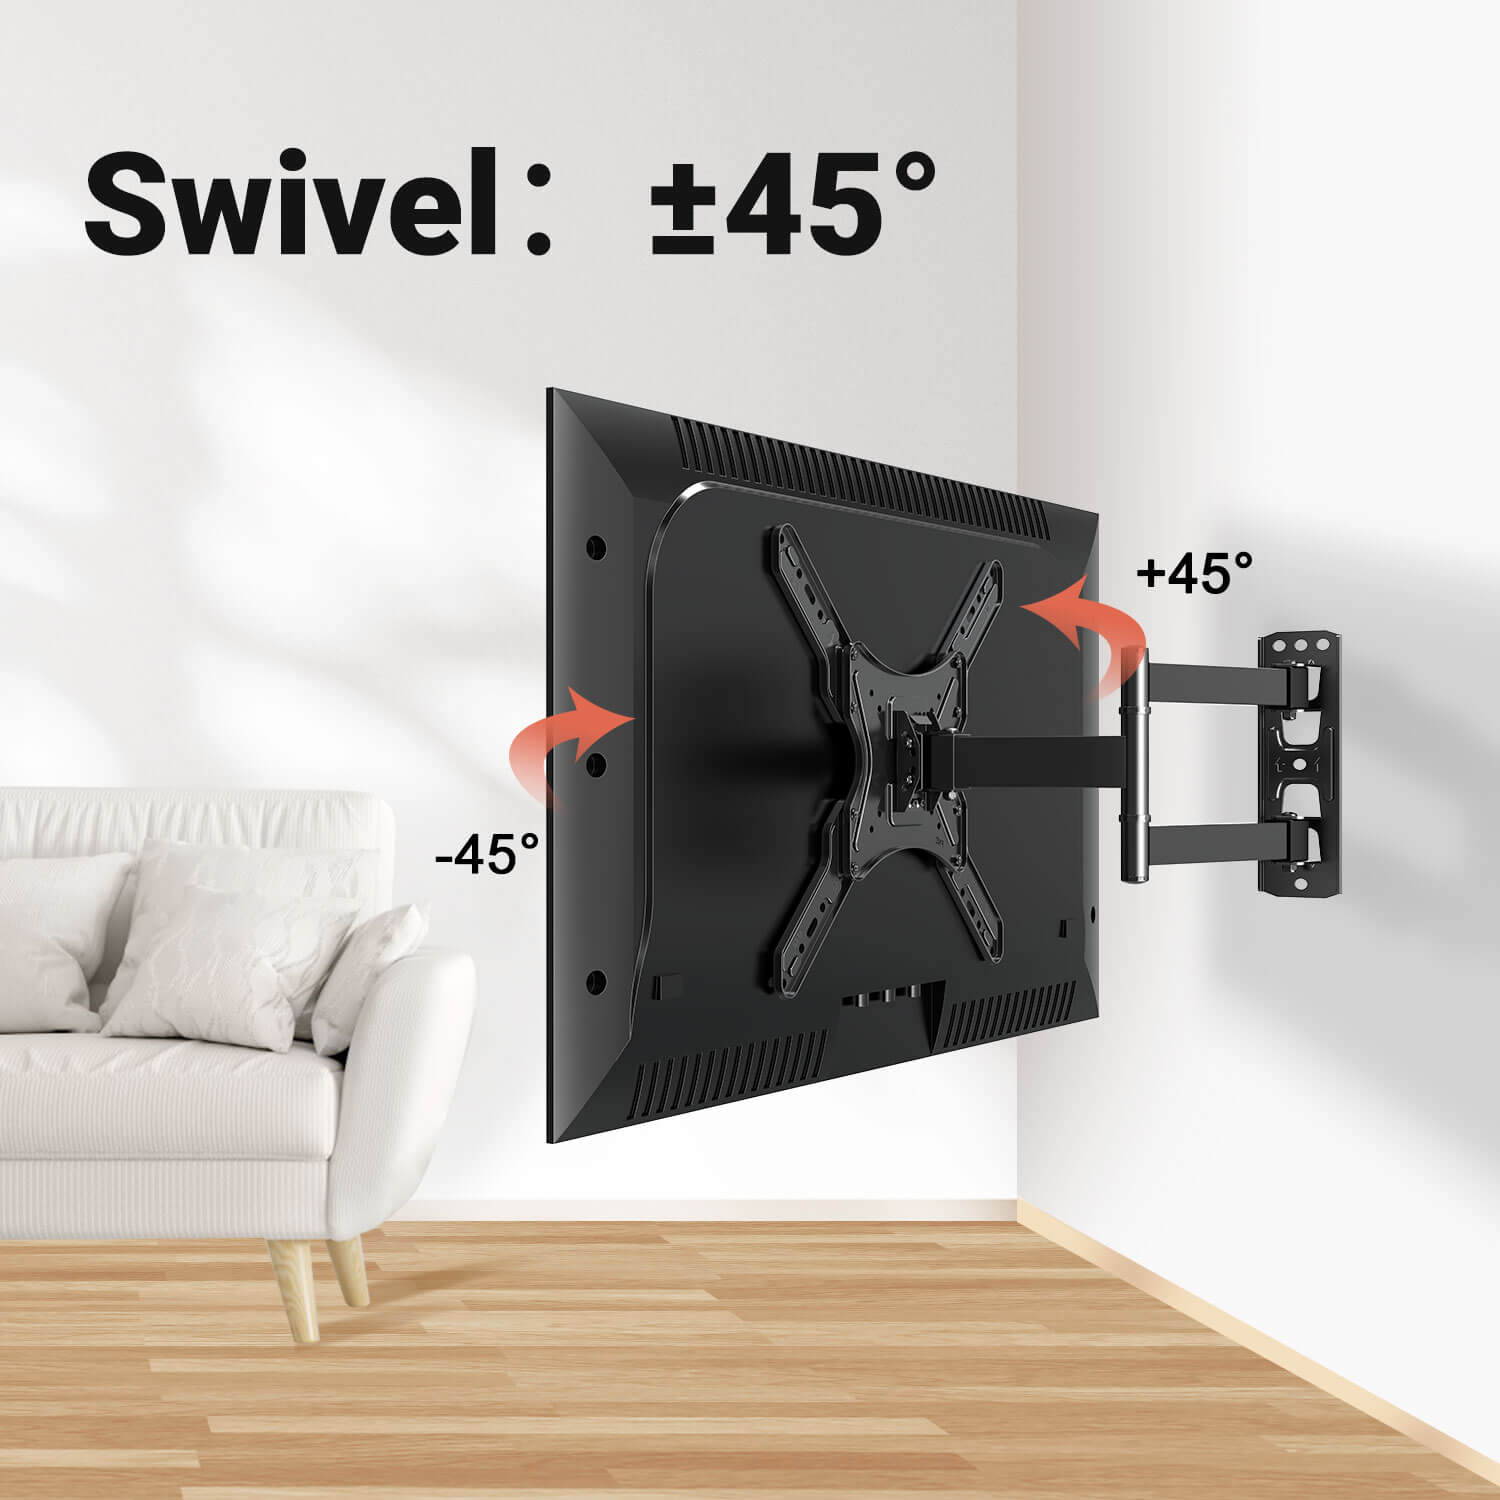 swivel TV mount for better viewing